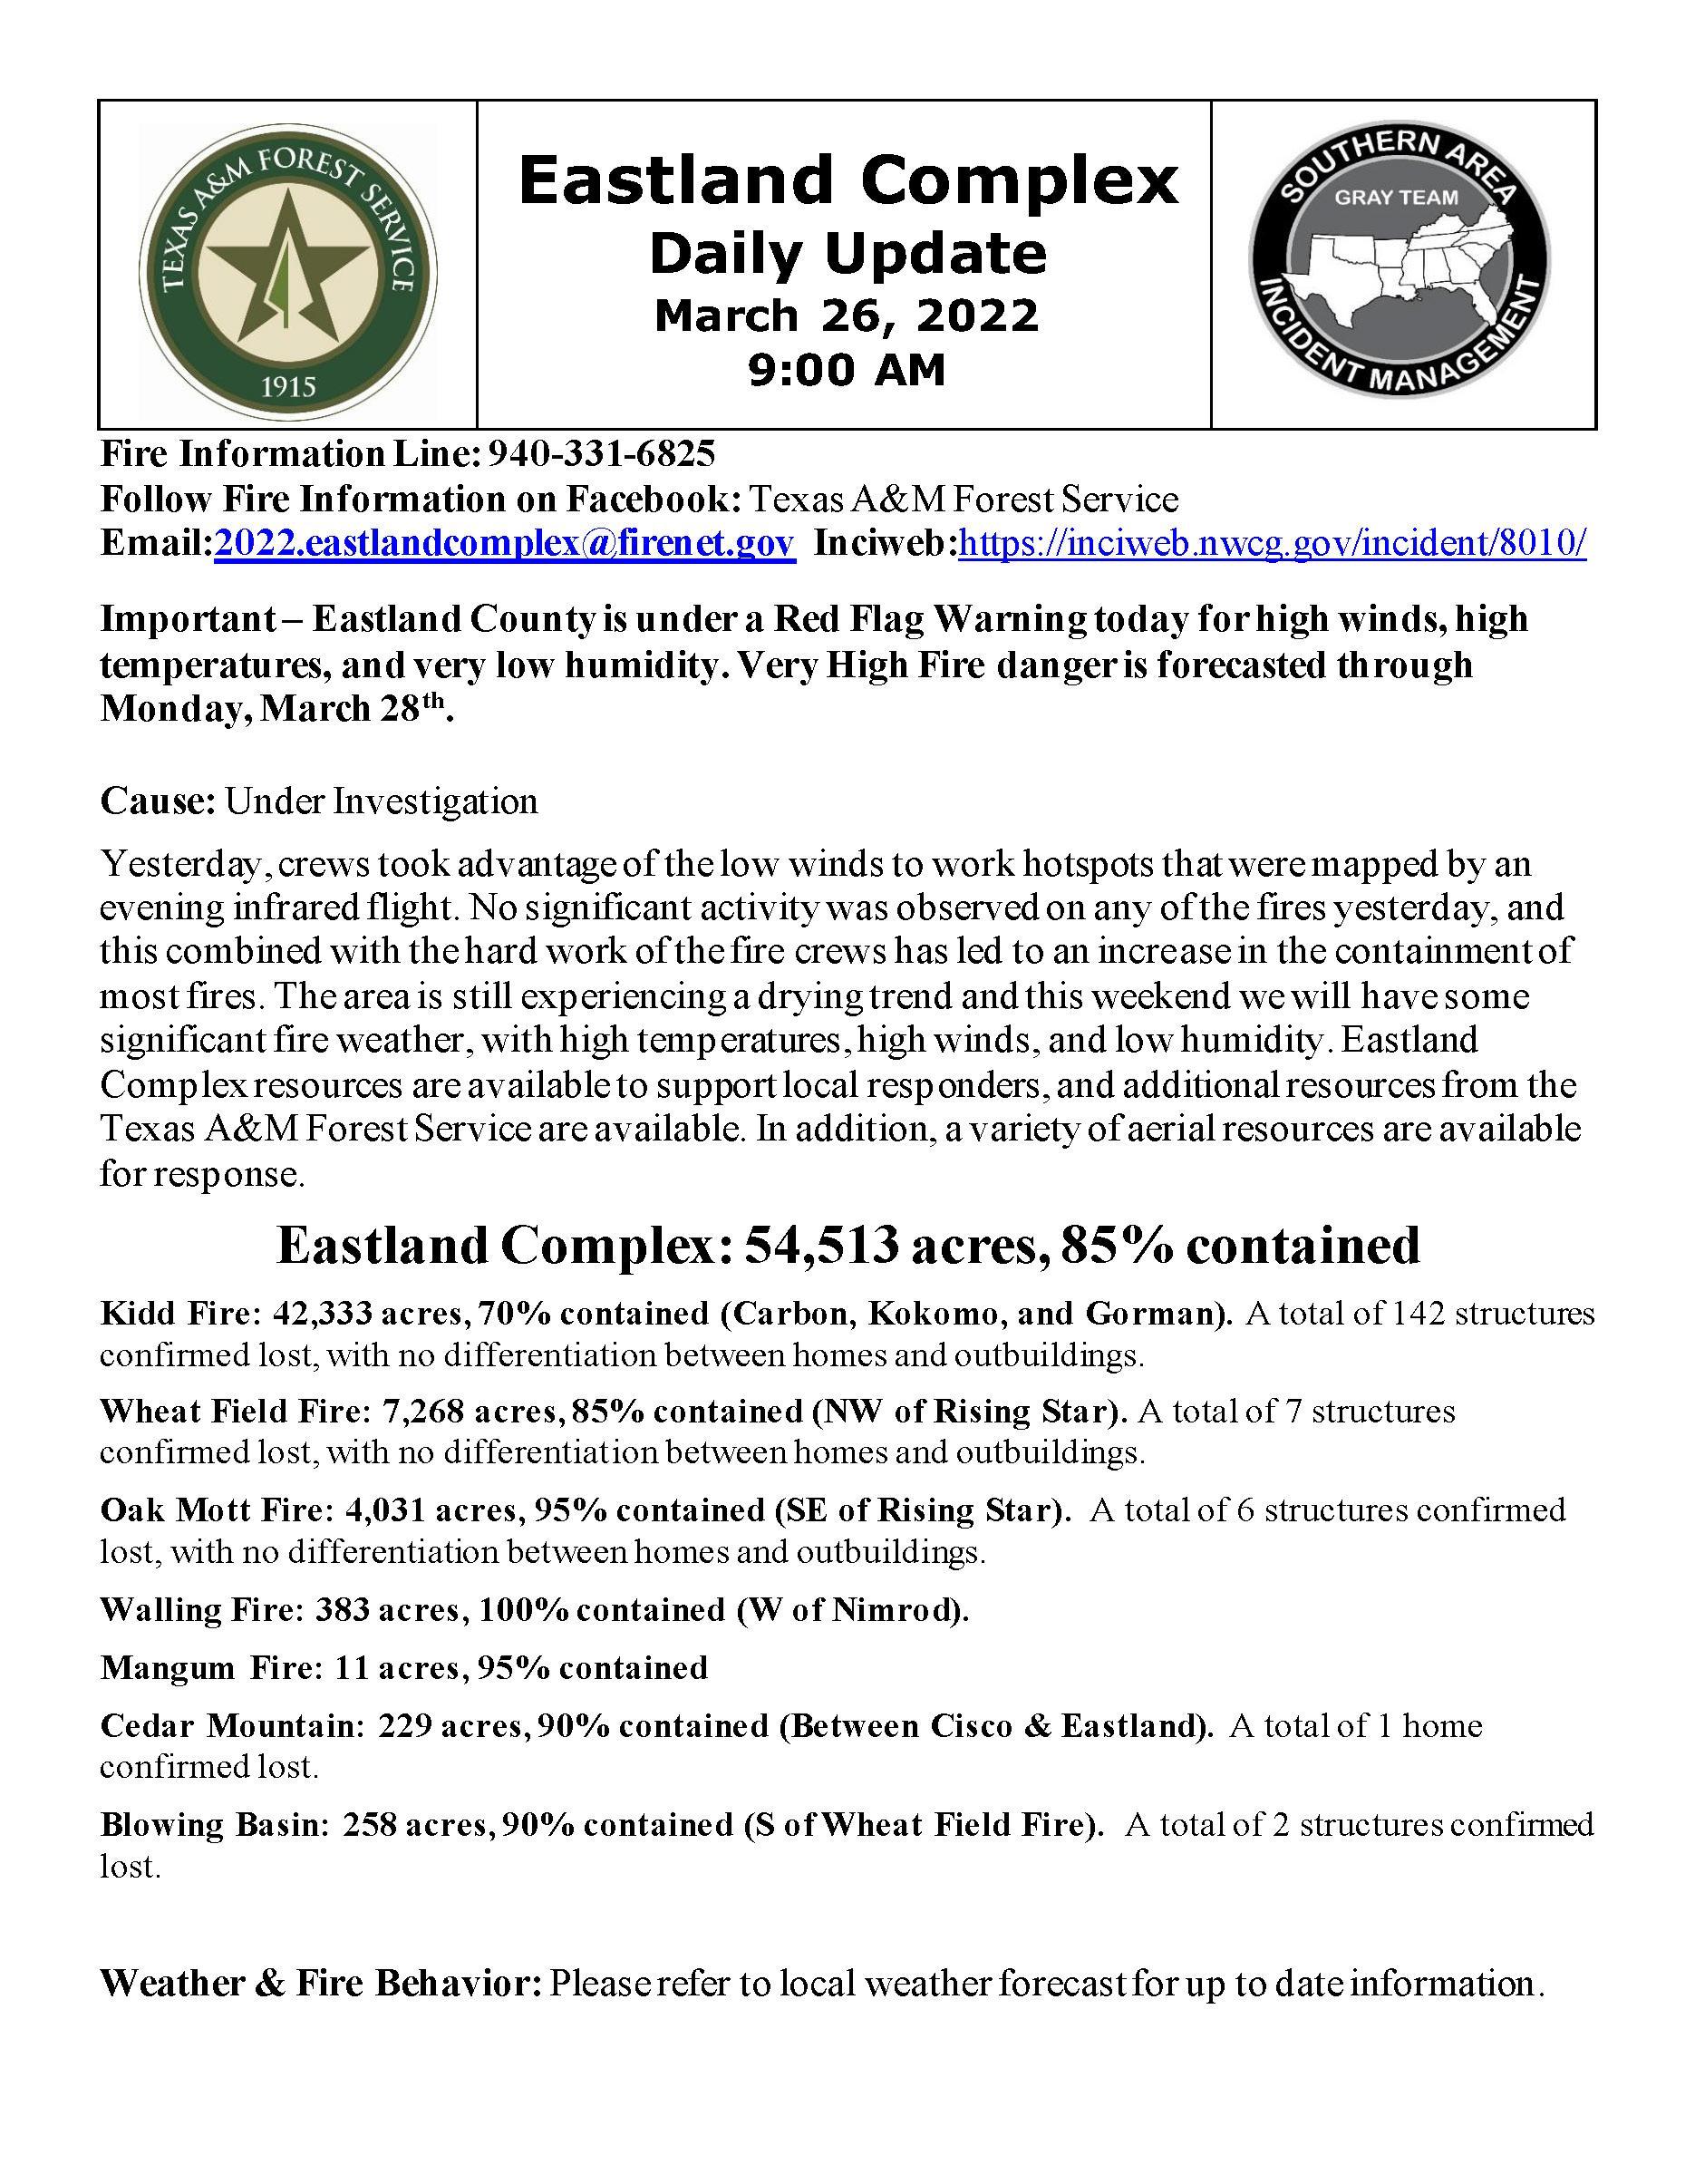 The document contains the March 26th daily update for Eastland Complex fire